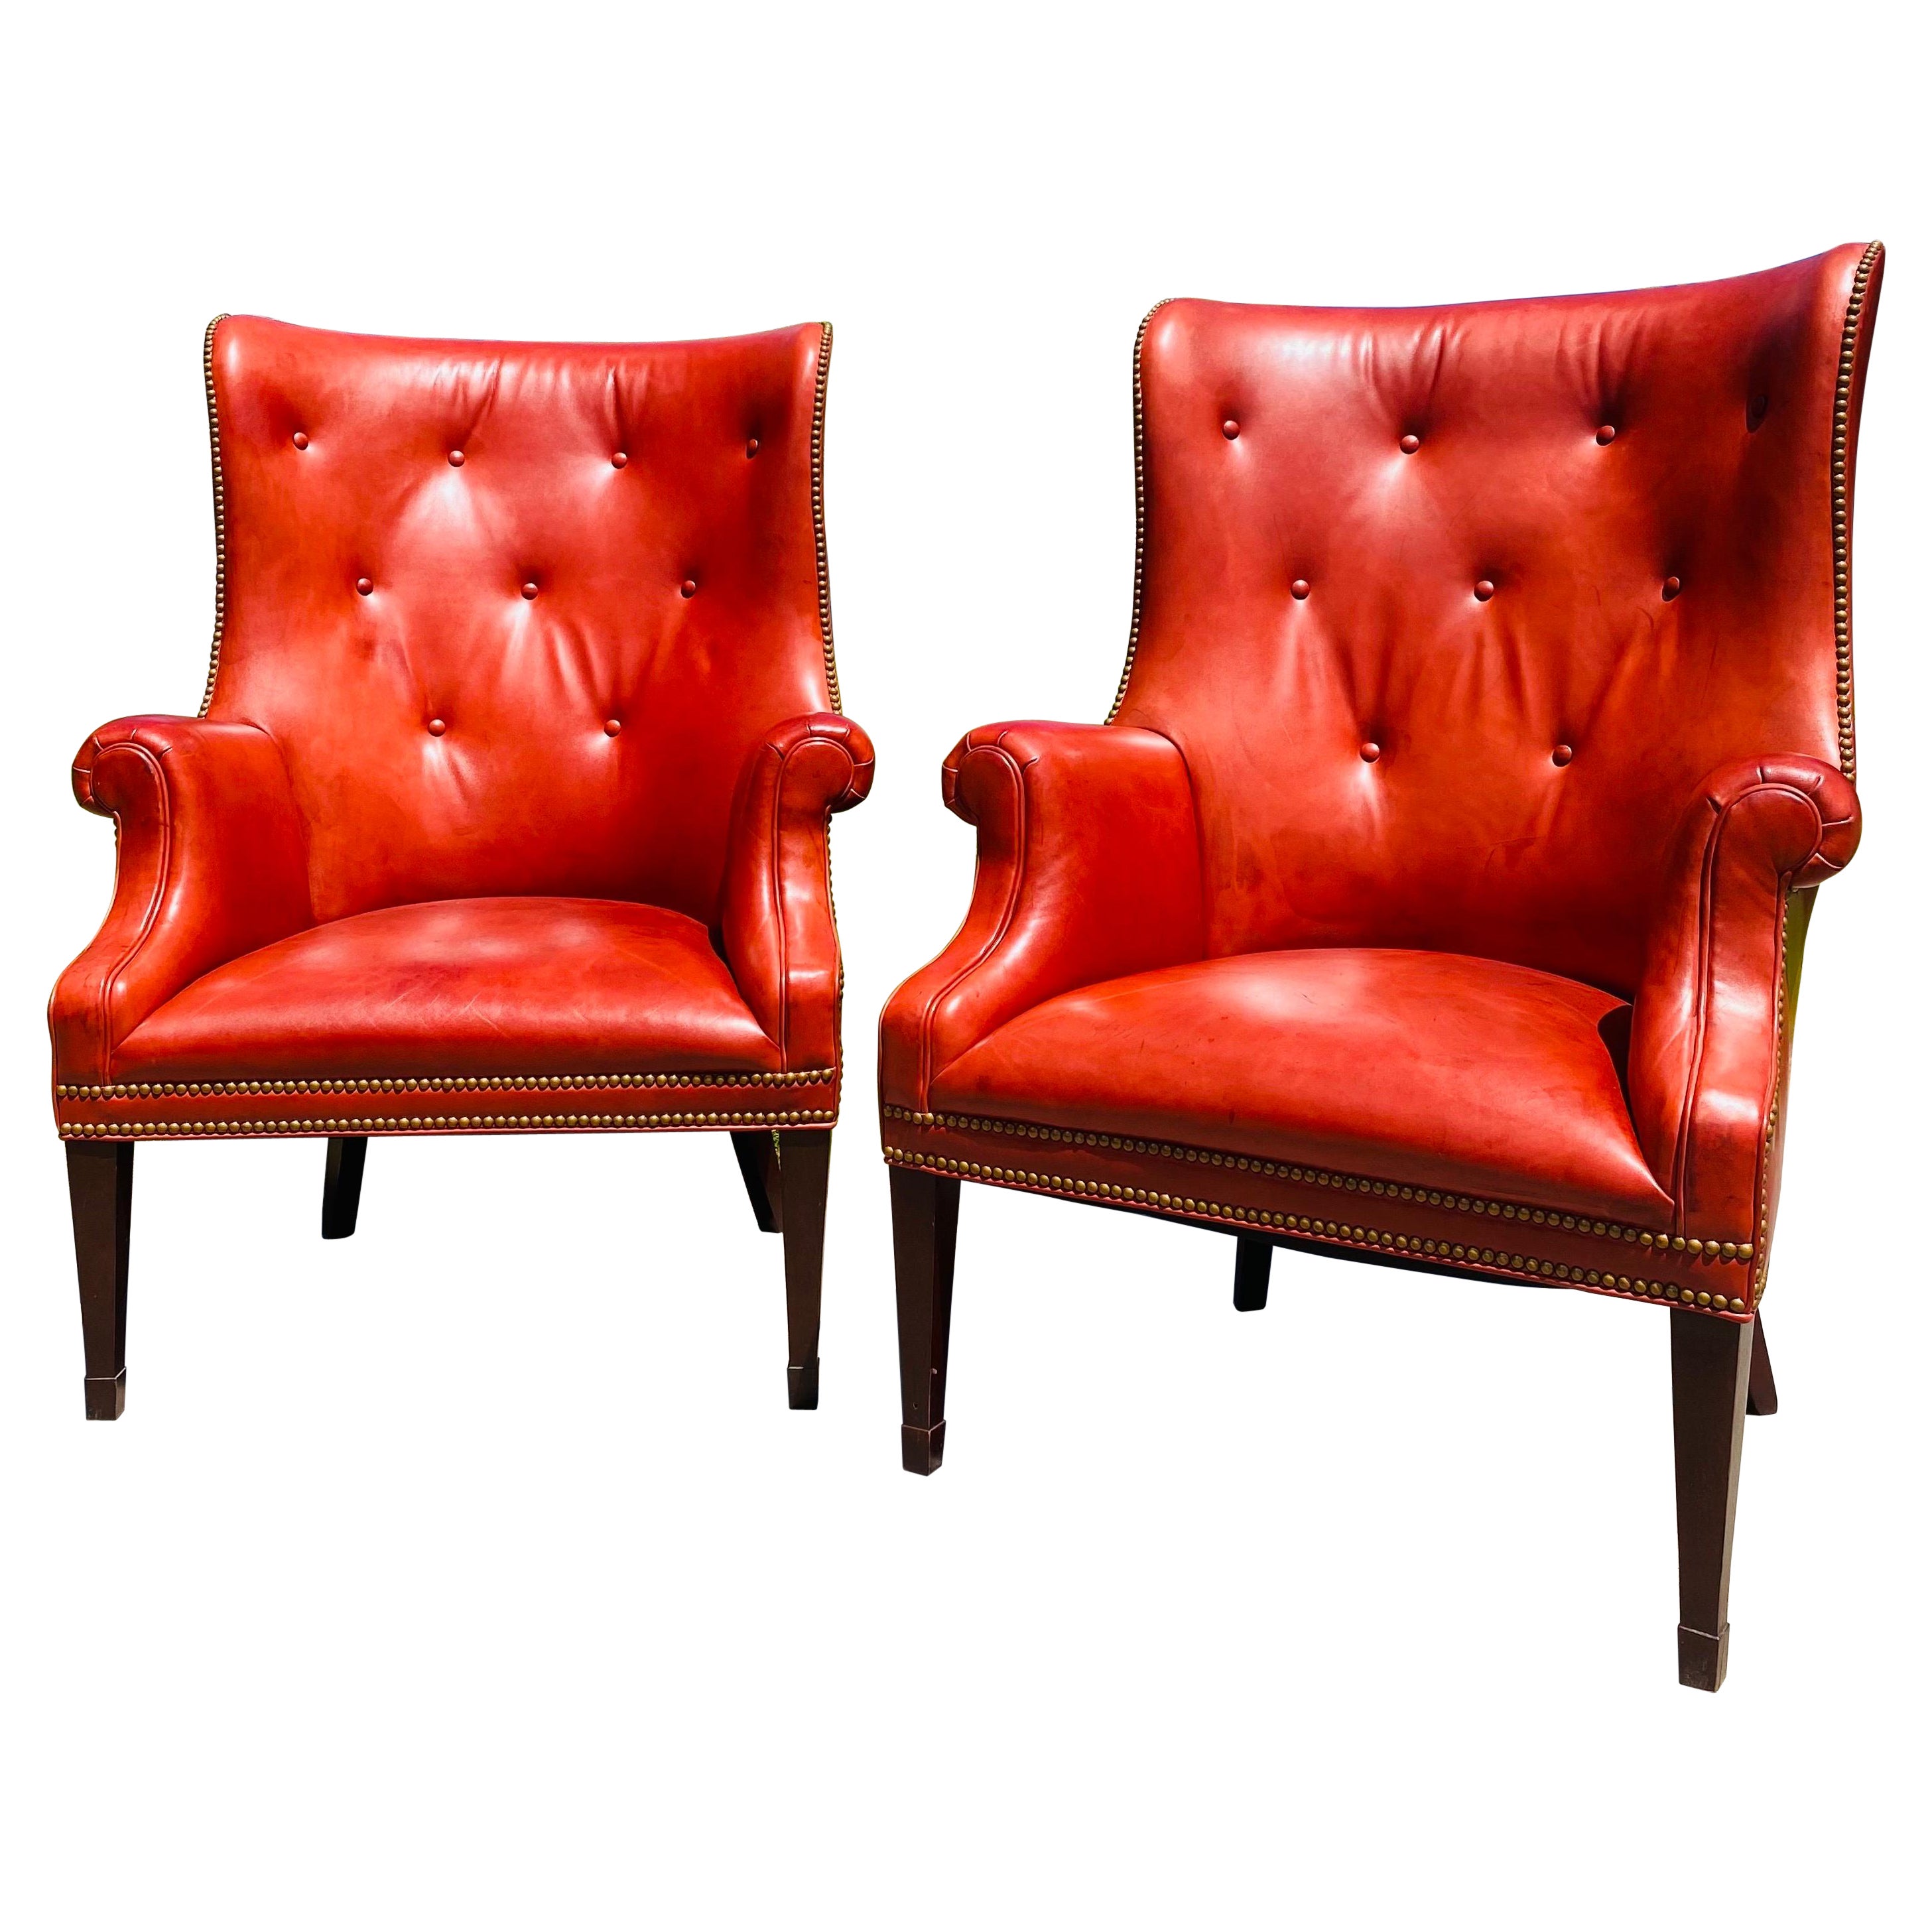 Vintage Hendrixsons Regency style leather wing chairs/a pair For Sale